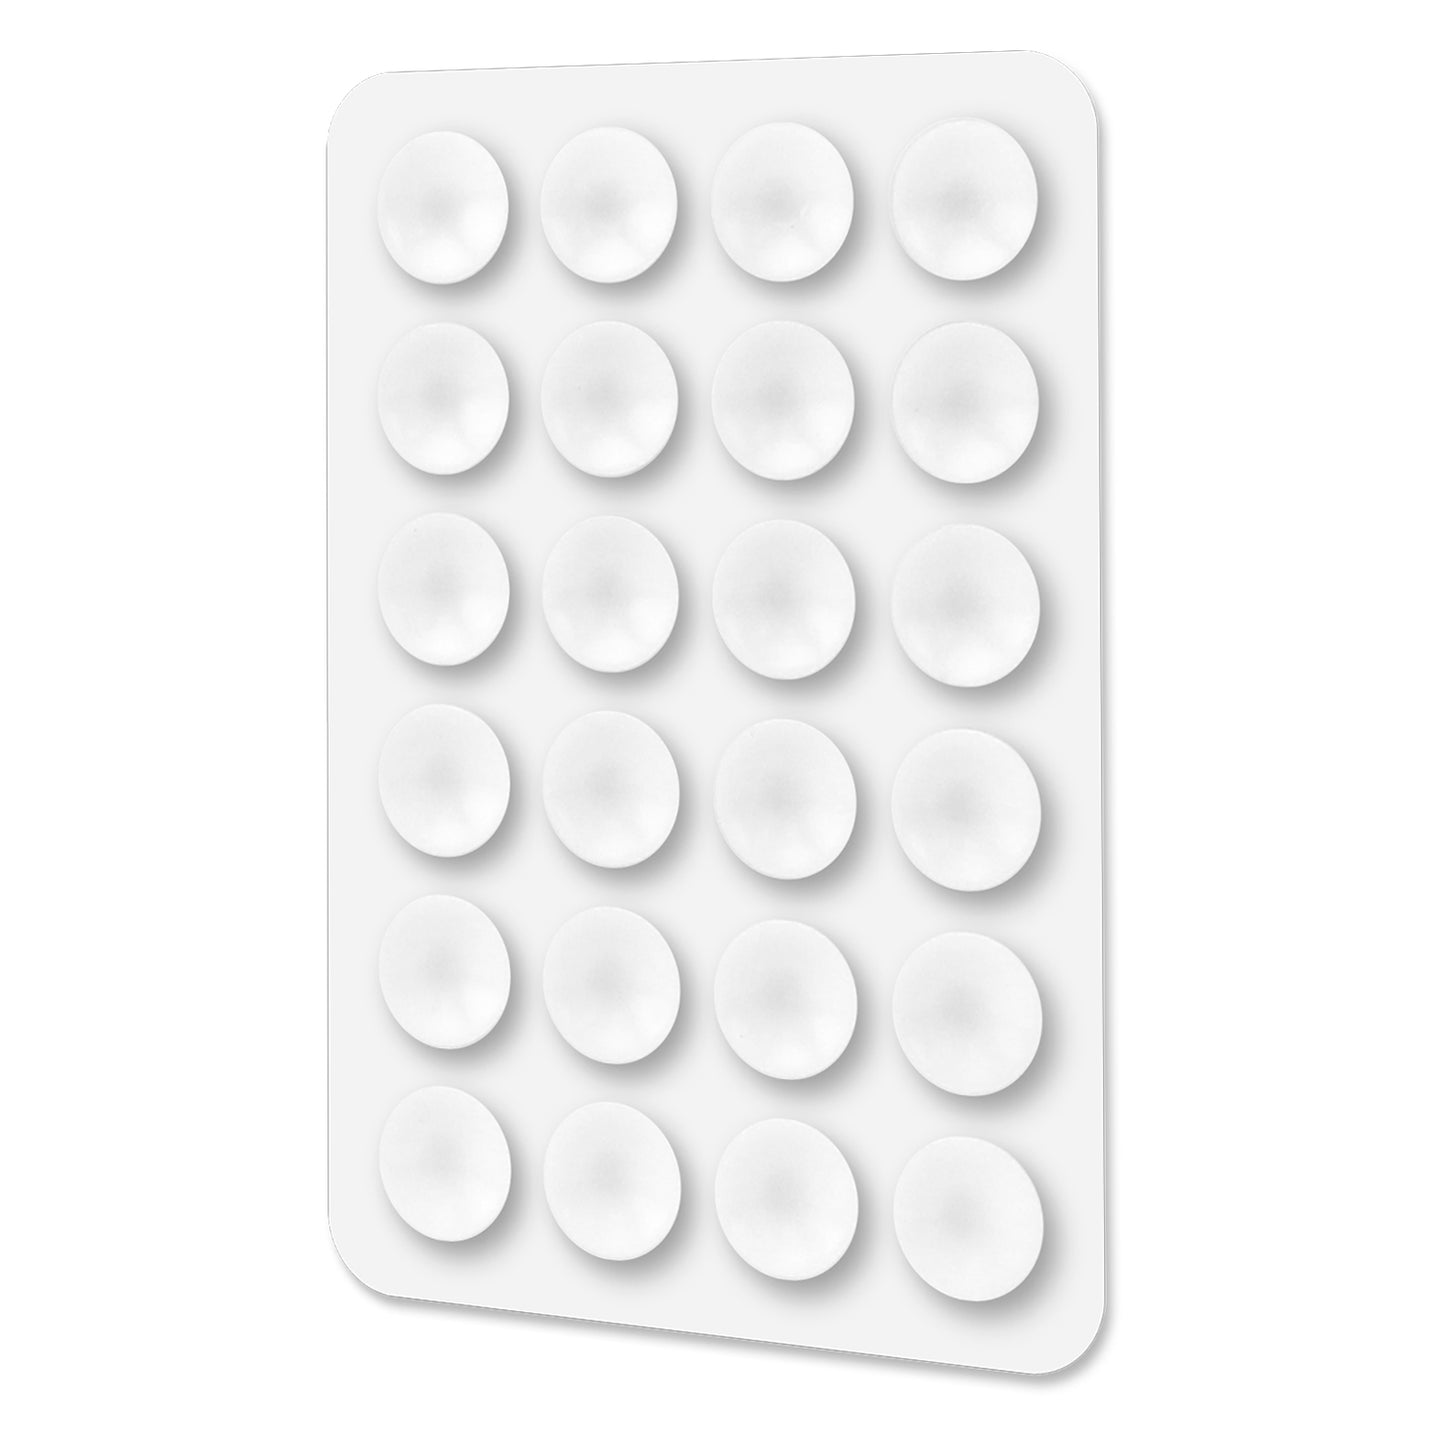 SCUPWT - Cellet Multipurpose Mini Suction Cup Mat with Strong 3M Adhesive - White